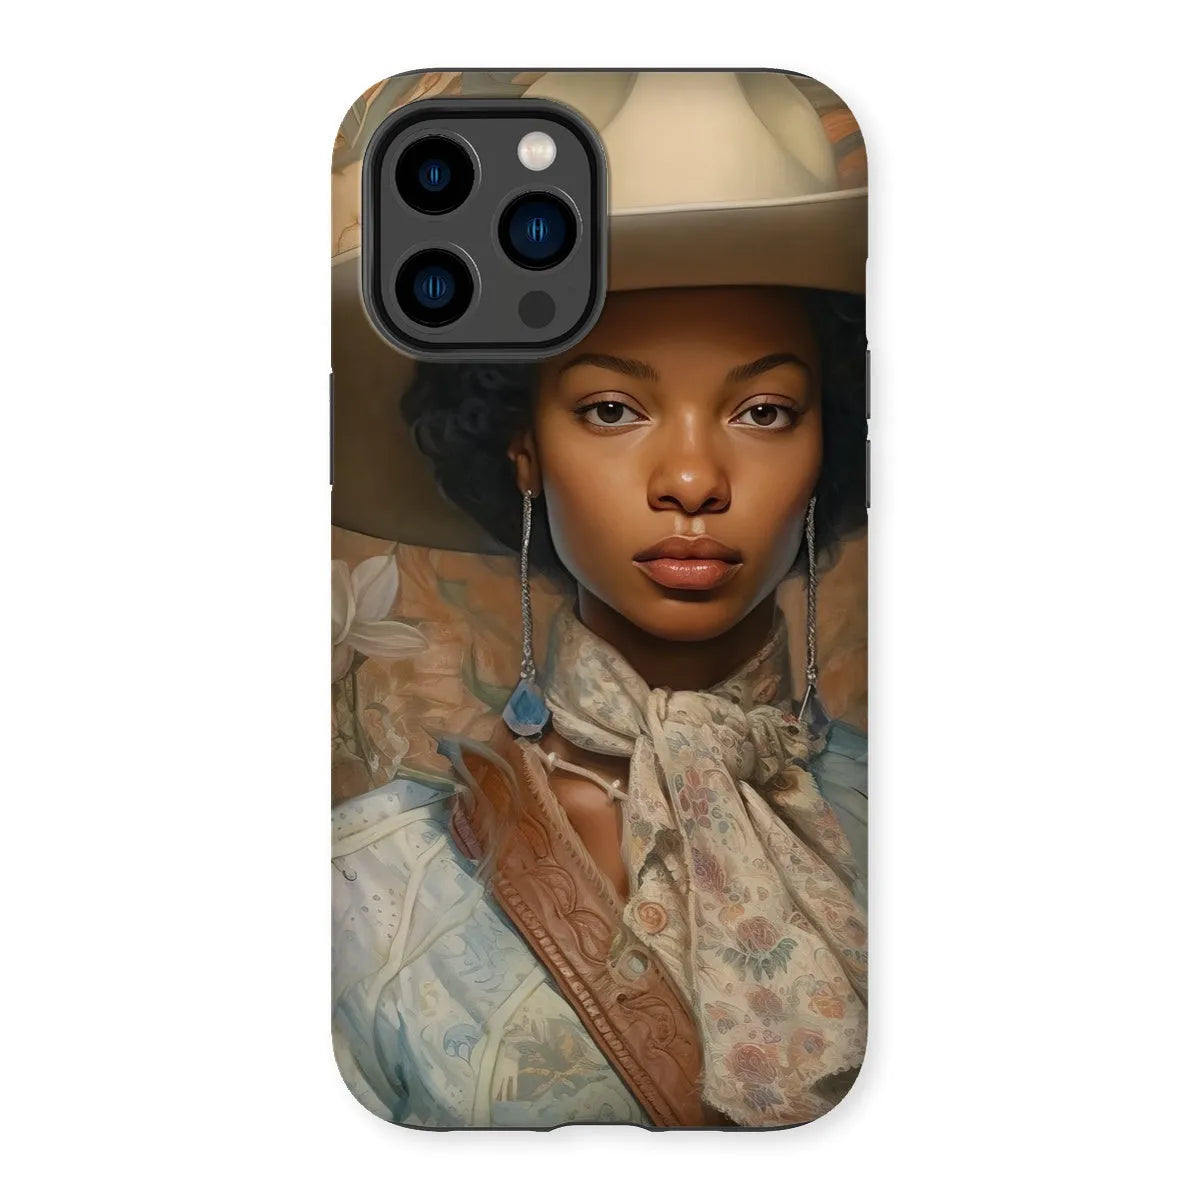 Imani The Lesbian Cowgirl - Sapphic Art Phone Case - Iphone 14 Pro Max / Matte - Mobile Phone Cases - Aesthetic Art